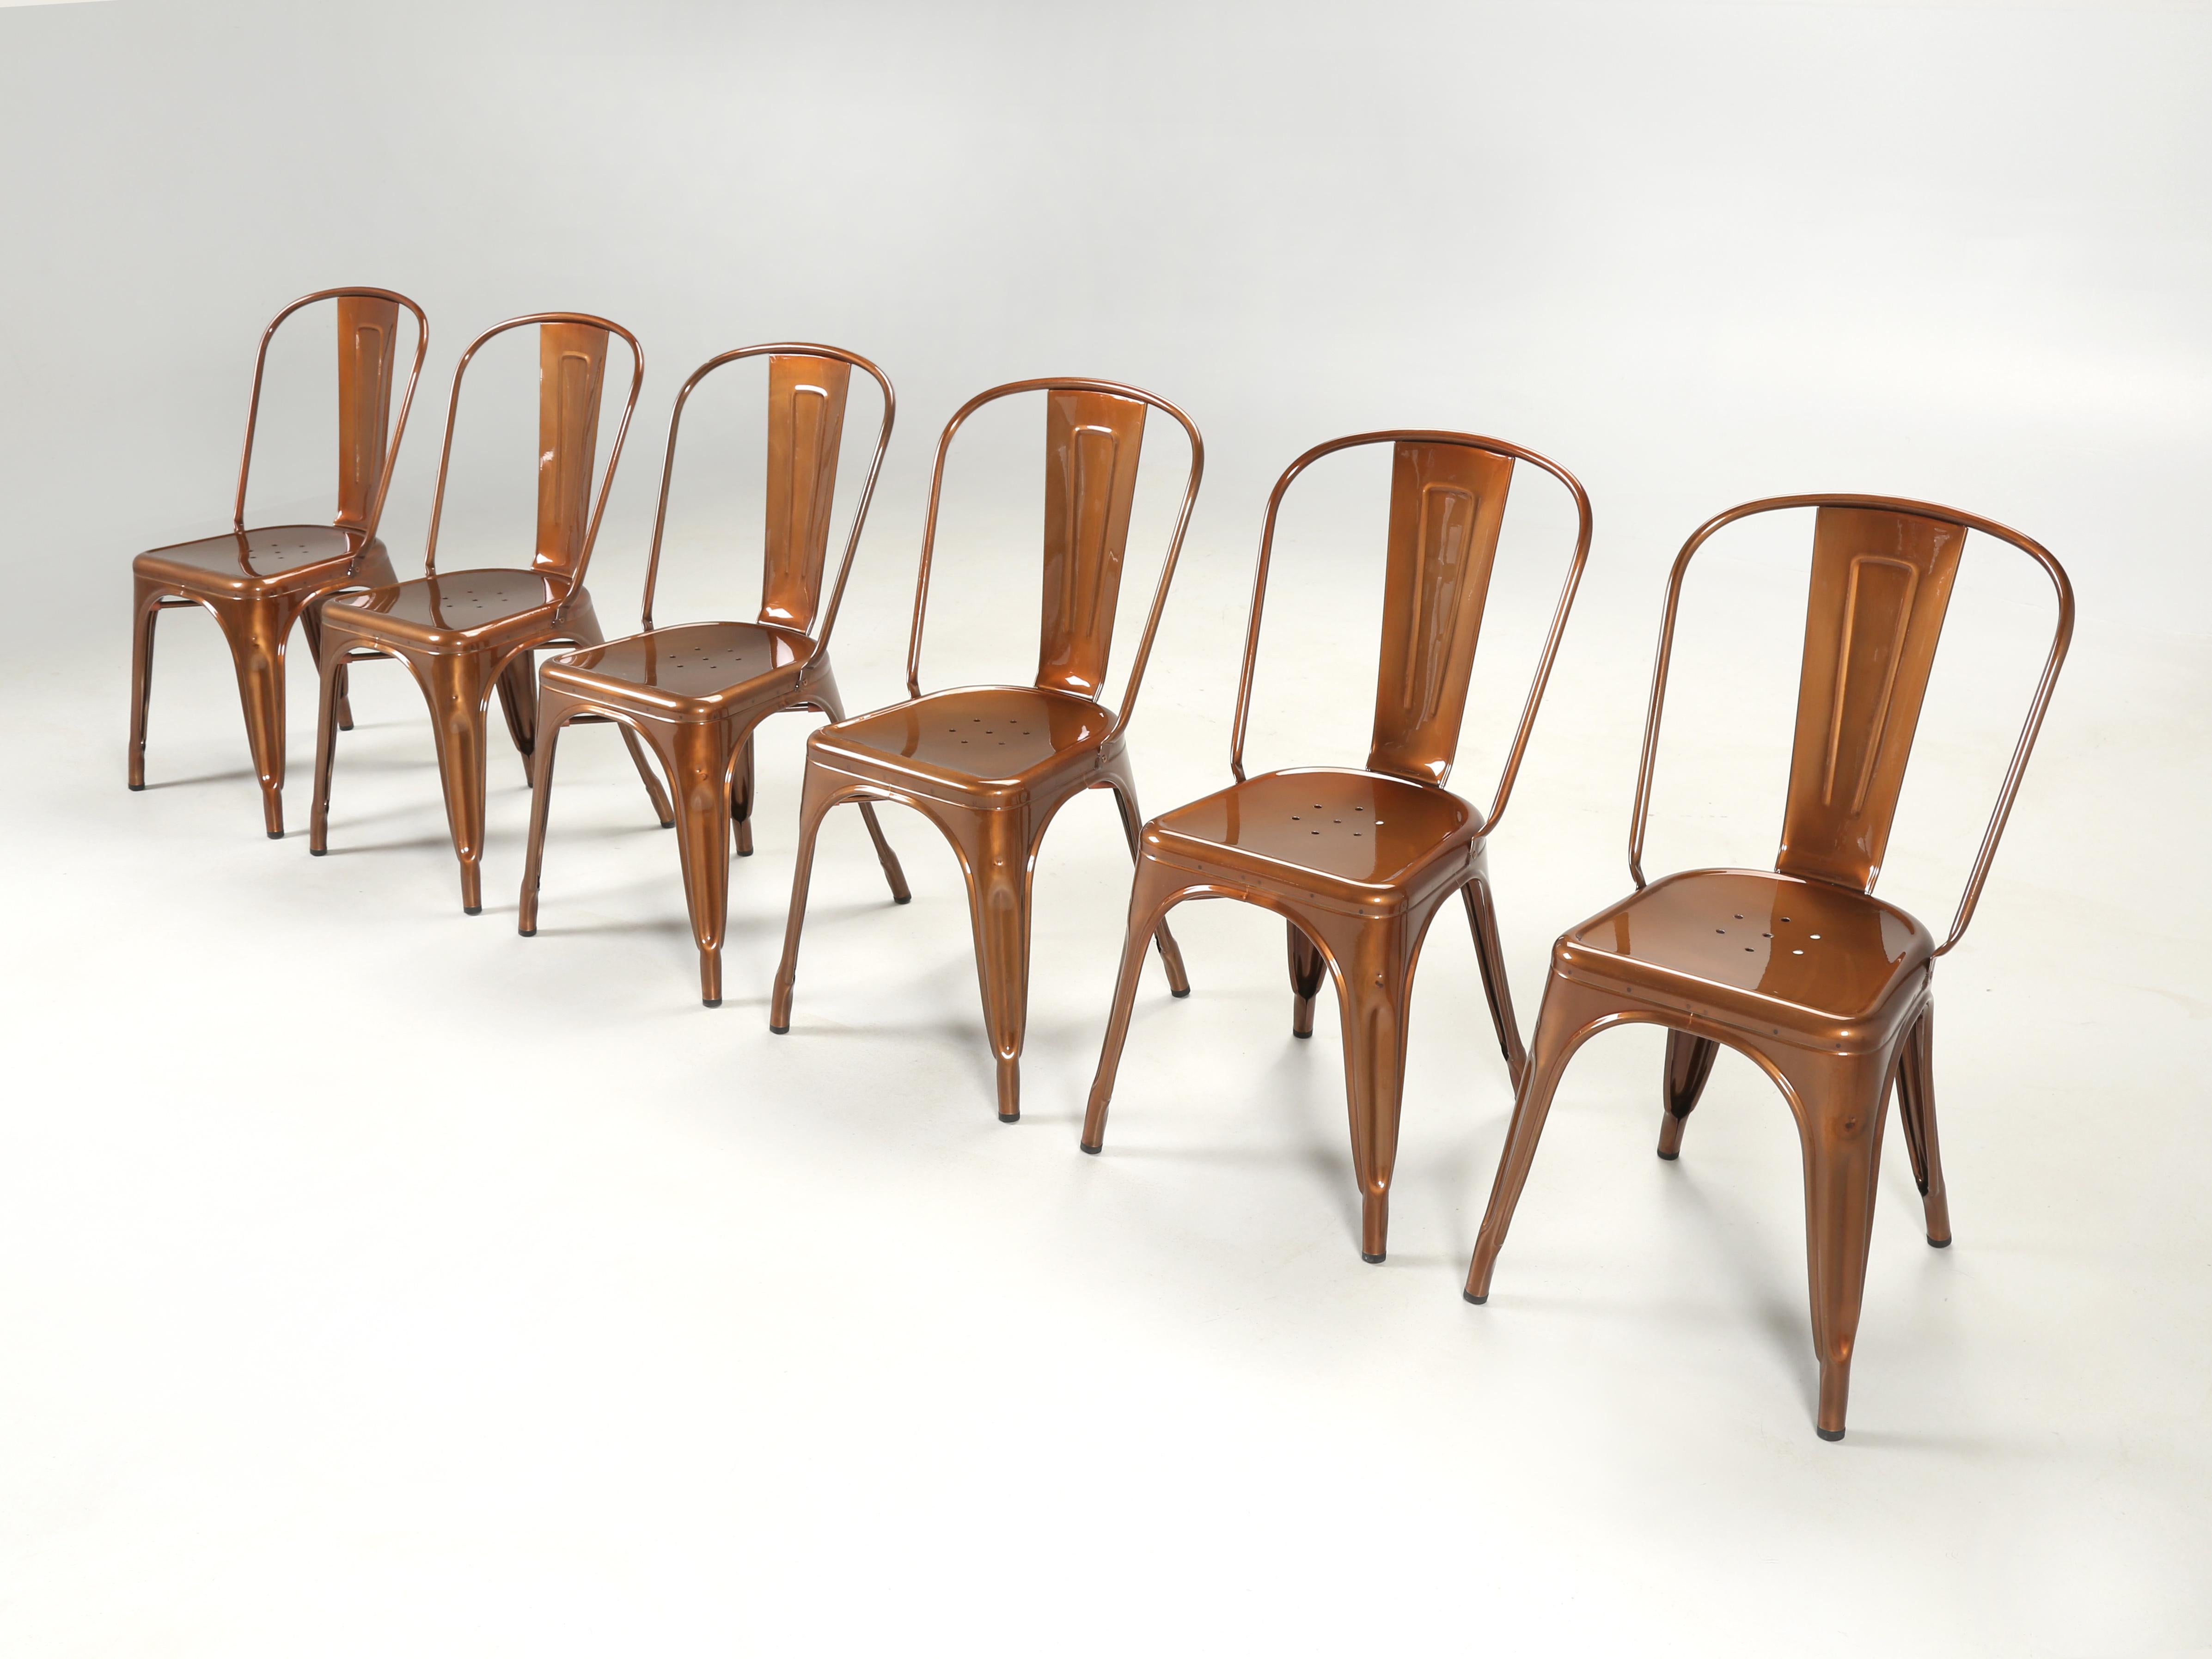 Genuine set of (6) Tolix steel stacking chairs in a beautiful and most unusual copper metallic colour. Currently, we have over (1500) pieces of authentic Tolix chairs, stools and dining tables in stock. Our Old Plank inventory has both, vintage